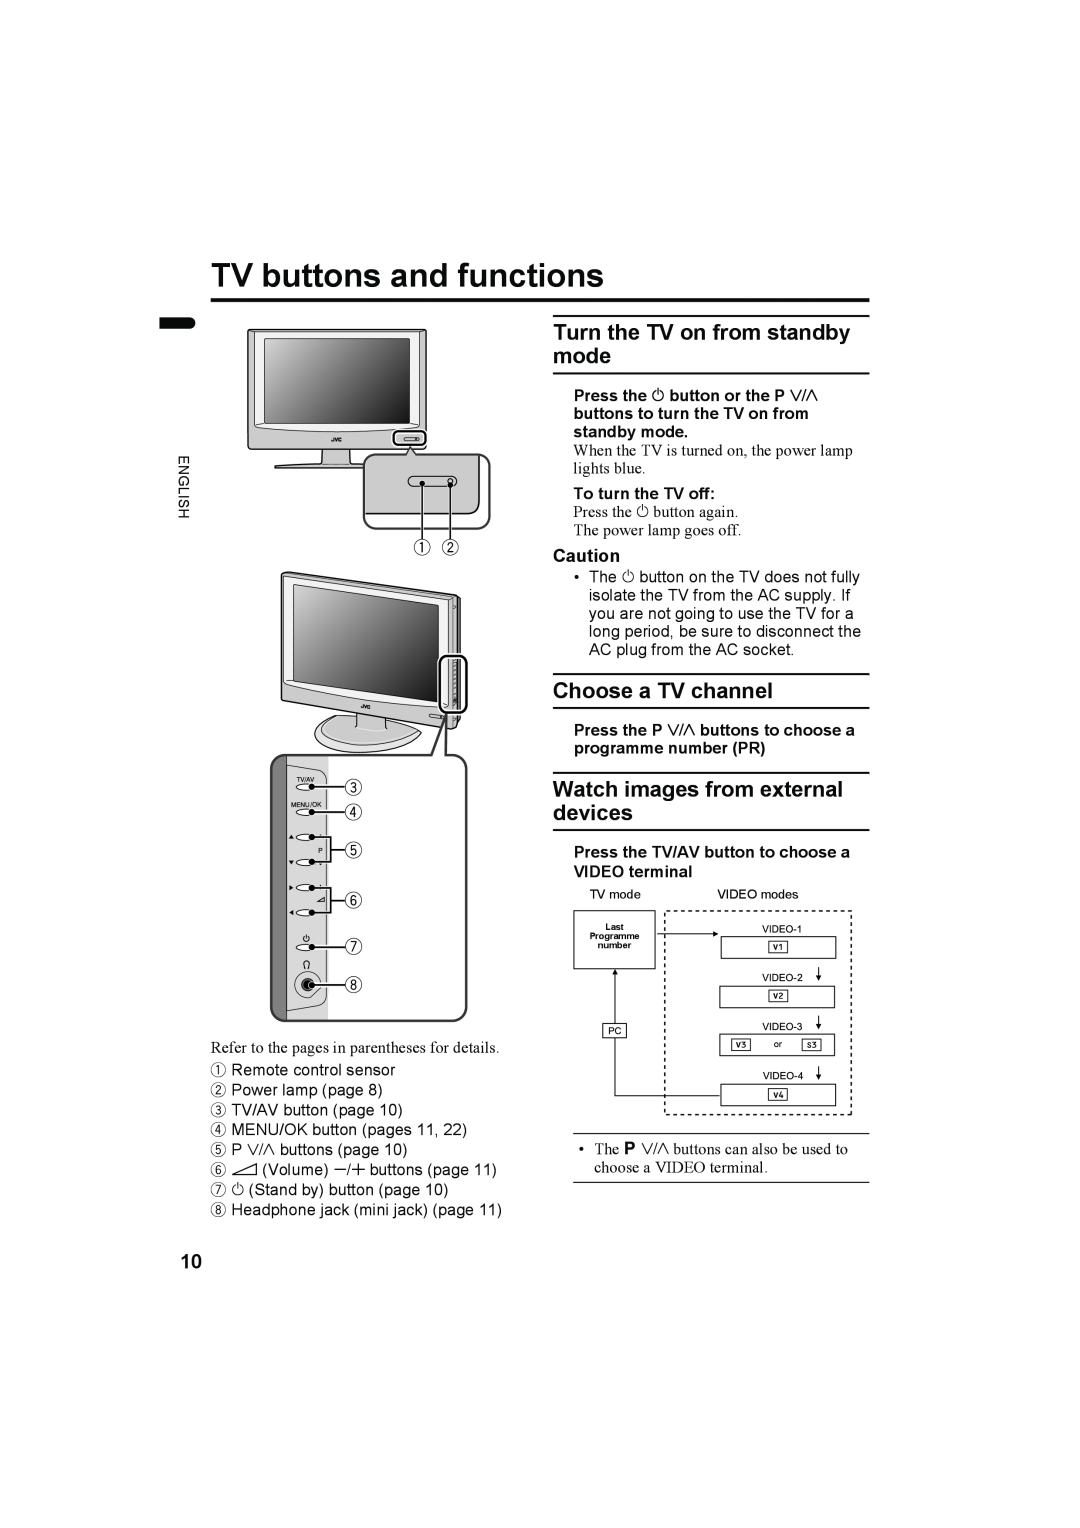 JVC LT-26AX5, LT-32AX5 TV buttons and functions, Turn the TV on from standby mode, Choose a TV channel, To turn the TV off 